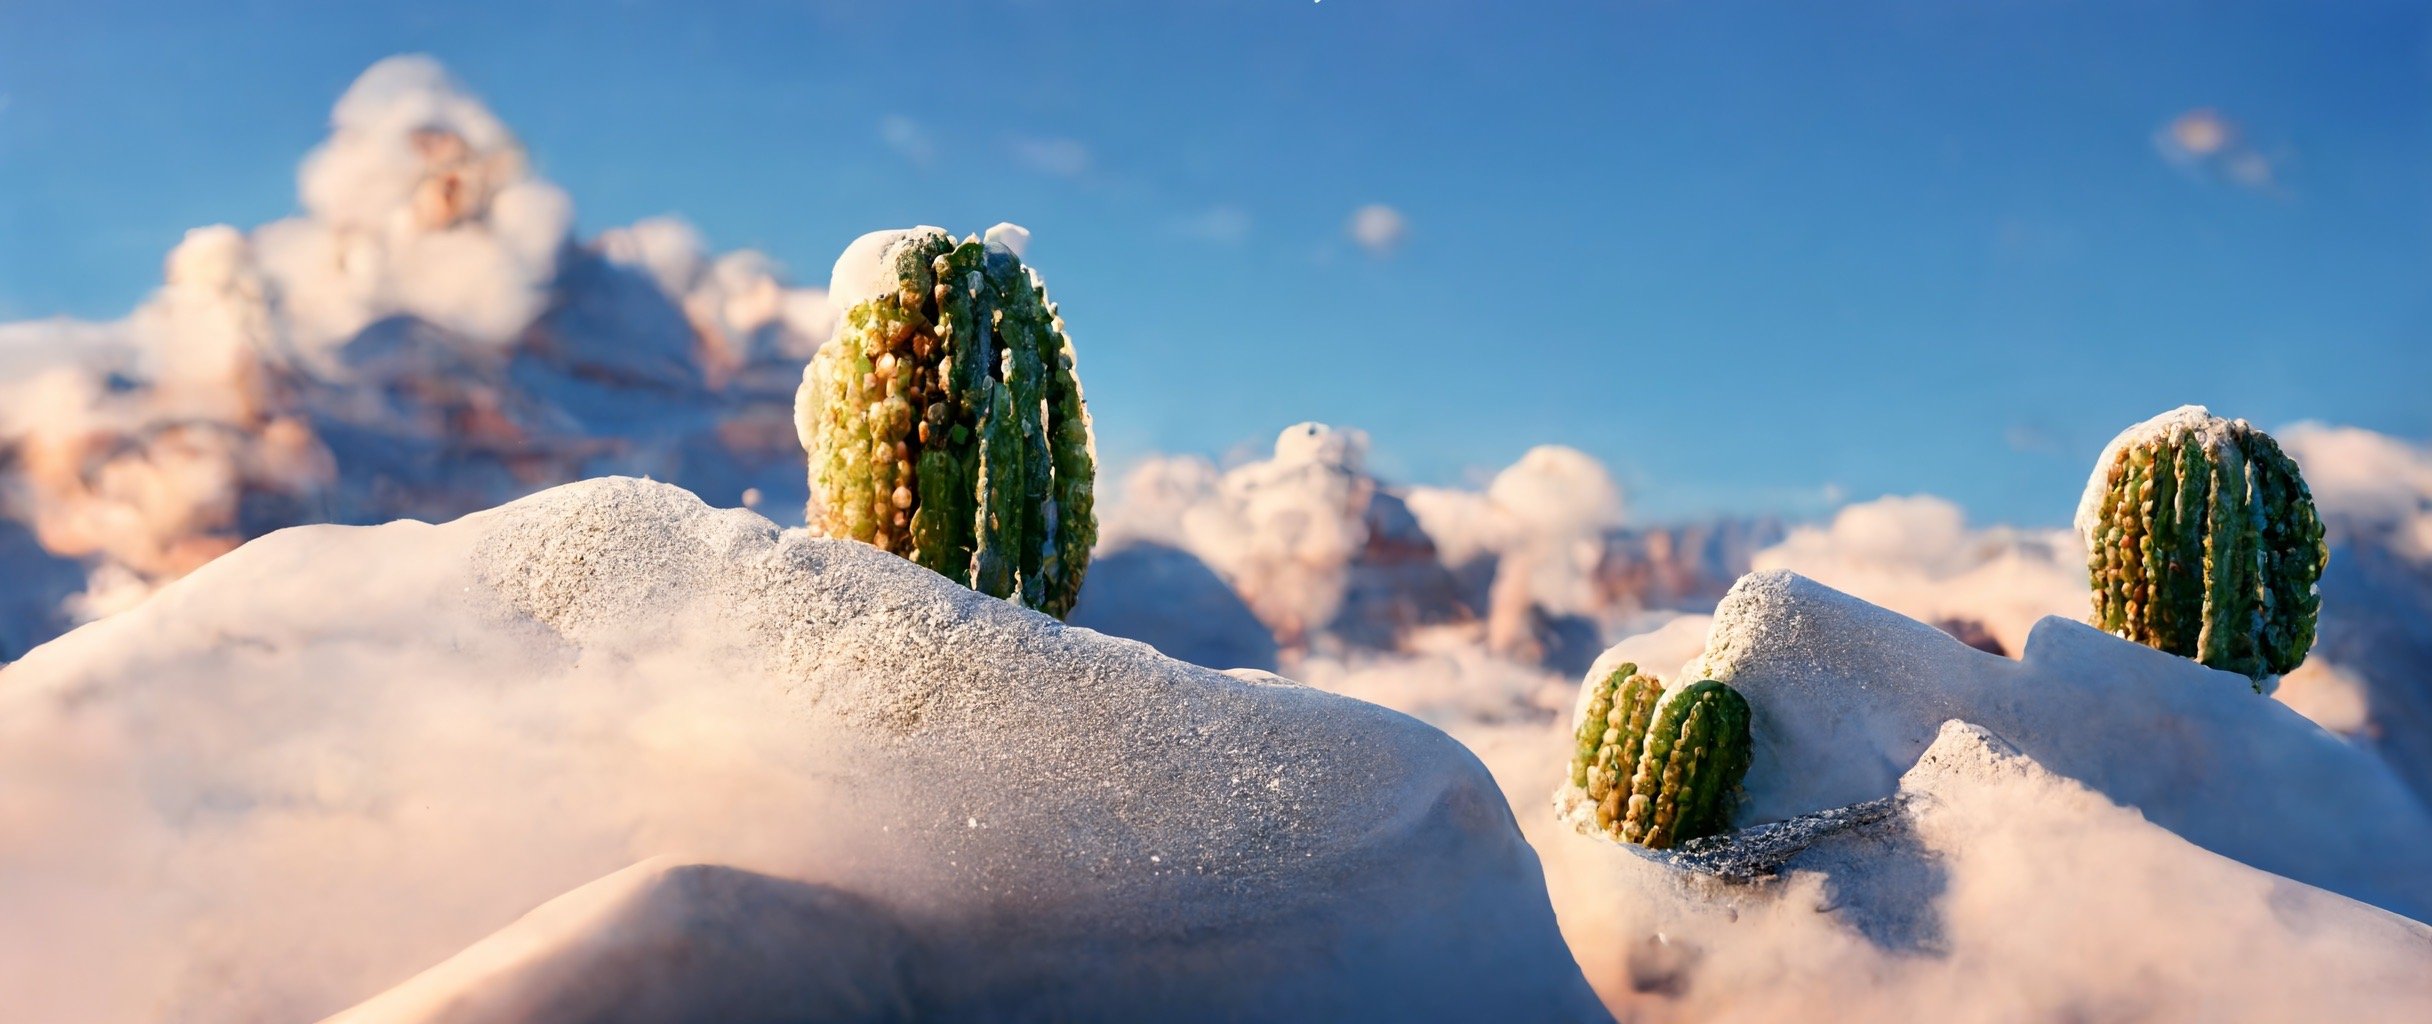 ac38fa03-7de8-4e68-8b8a-27b7ac6127f3_S3RAPH_epic_dessert_with_snow_and_frozen_cactus._intricate_details._cinematic_composition_beautiful_sky_can.JPG